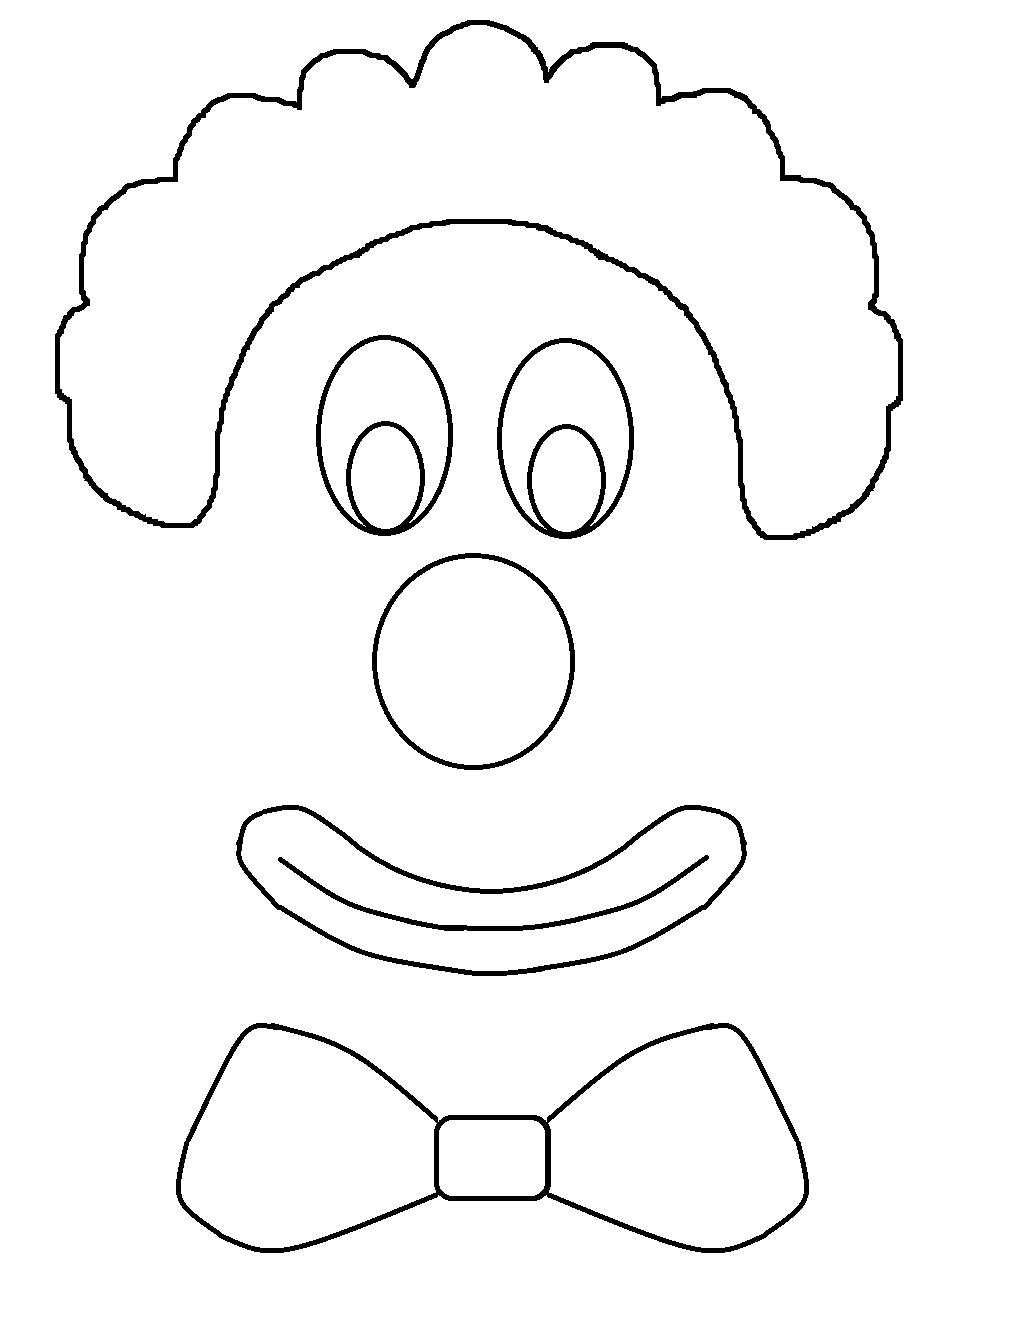 Cartoon Clown Face For Kids Coloring Page